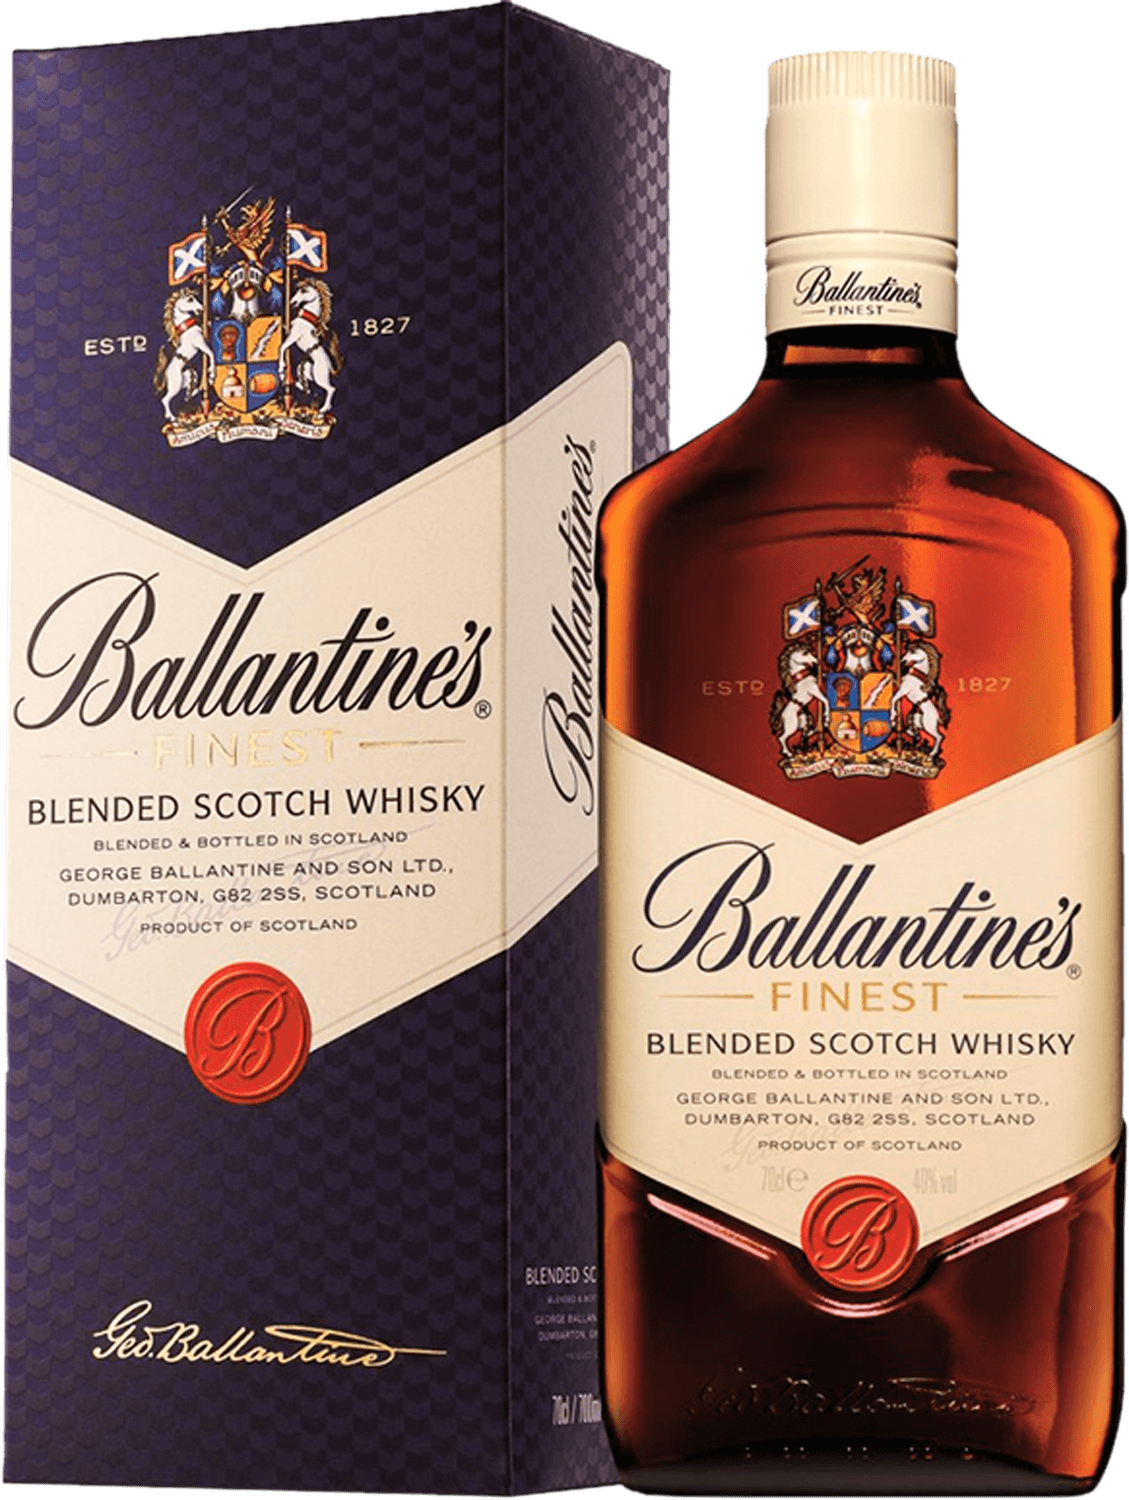 Ballantine's Finest blended scotch whisky (gift box) angus dundee cask strength blended grain scotch whisky 50 y o gift box